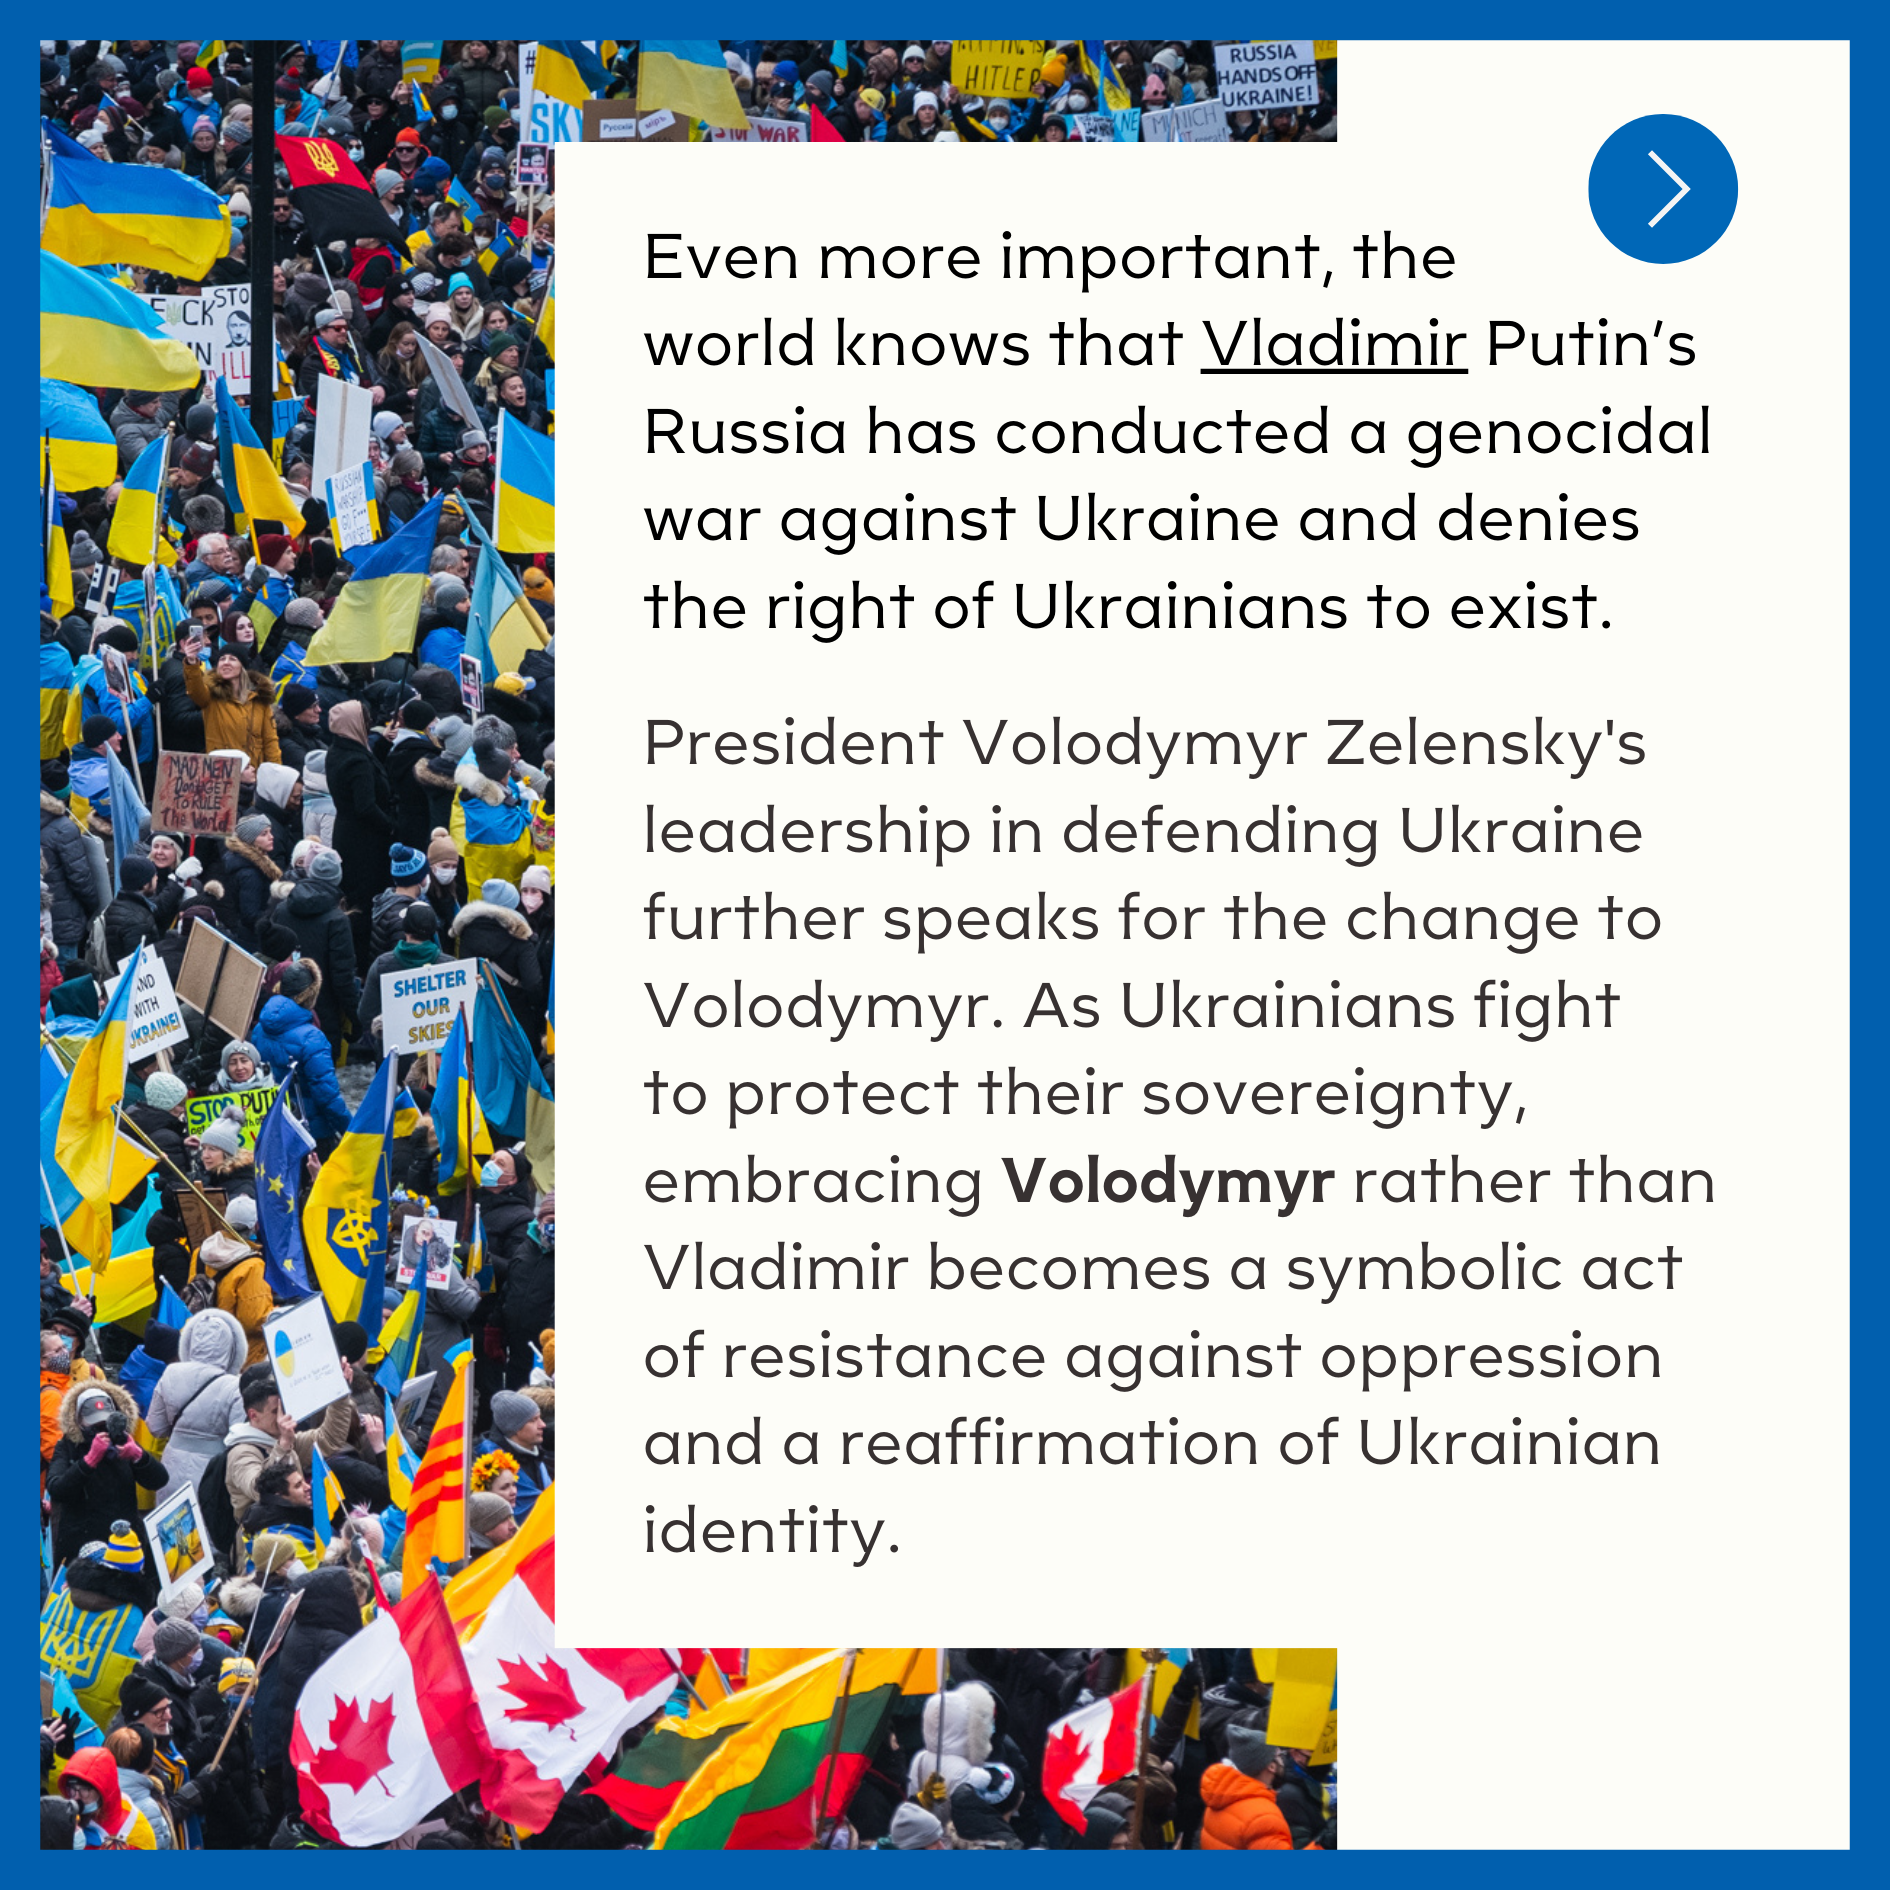  Even more important, the world knows that Vladimir Putin’s Russia has conducted a genocidal war against Ukraine and denies the right of Ukrainians to exist.  President Volodymyr Zelensky's leadership in defending Ukraine further speaks for the chang